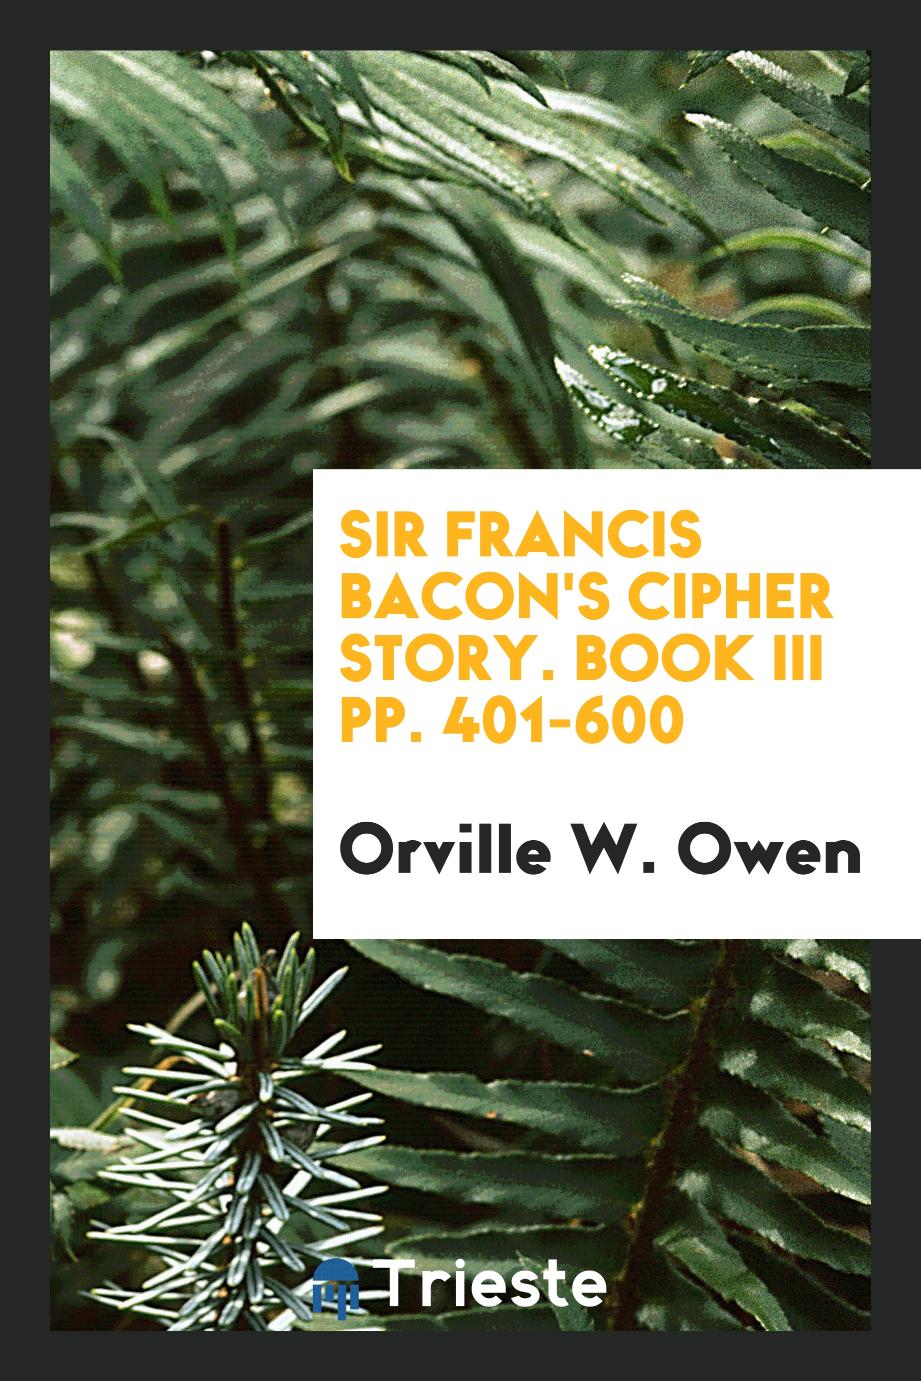 Sir Francis Bacon's cipher story. Book III pp. 401-600